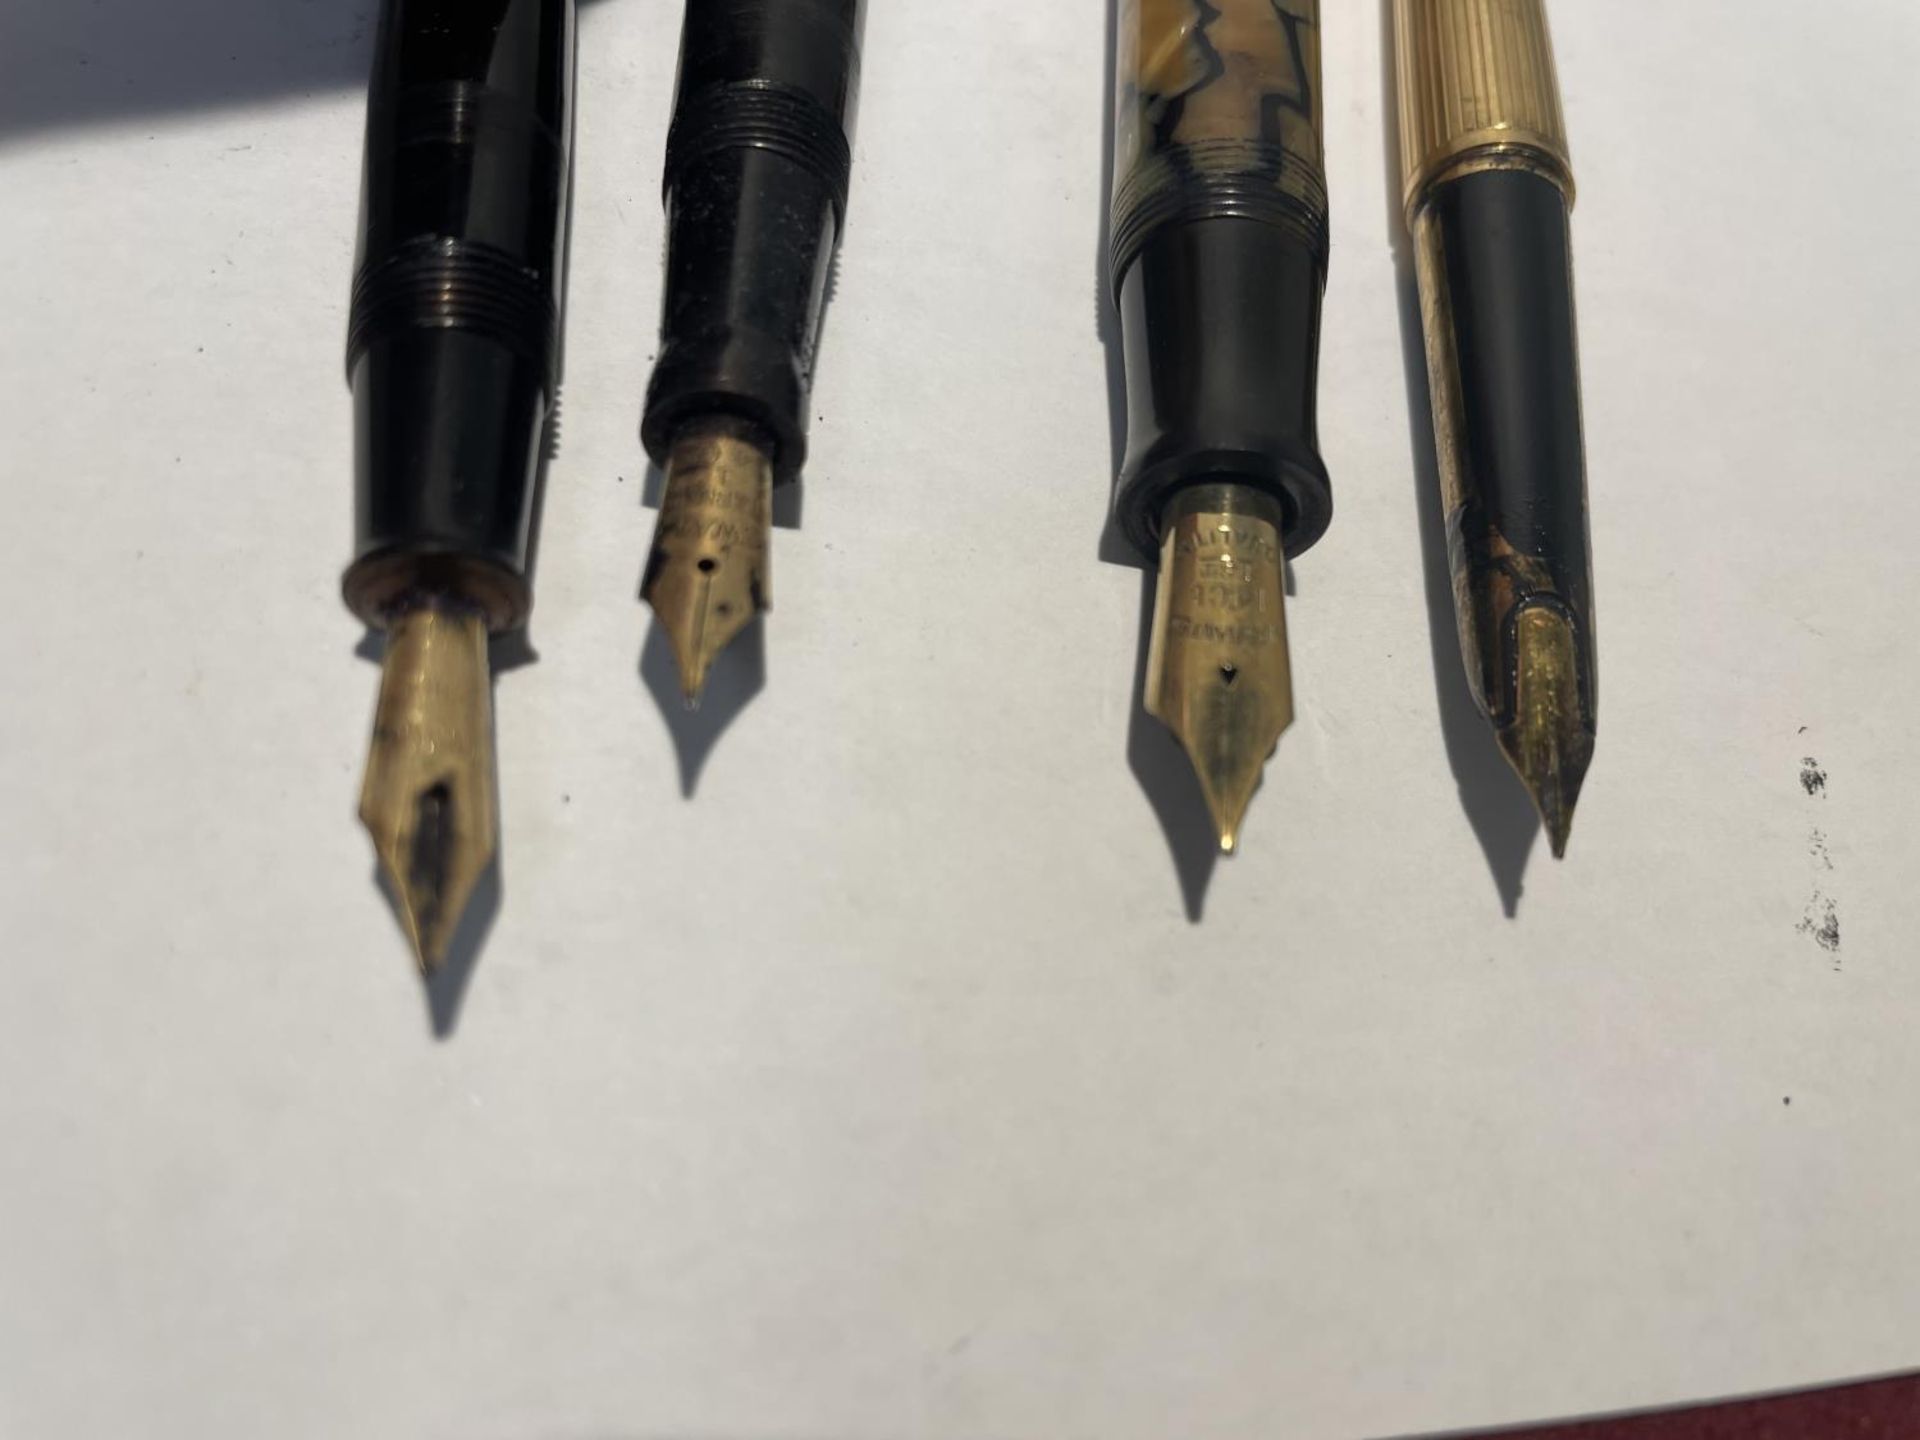 FOUR VINTAGE FOUNTAIN PENS - THREE WITH 14 CARAT AND ONE 18 CARAT GOLD NIBS - Image 3 of 3